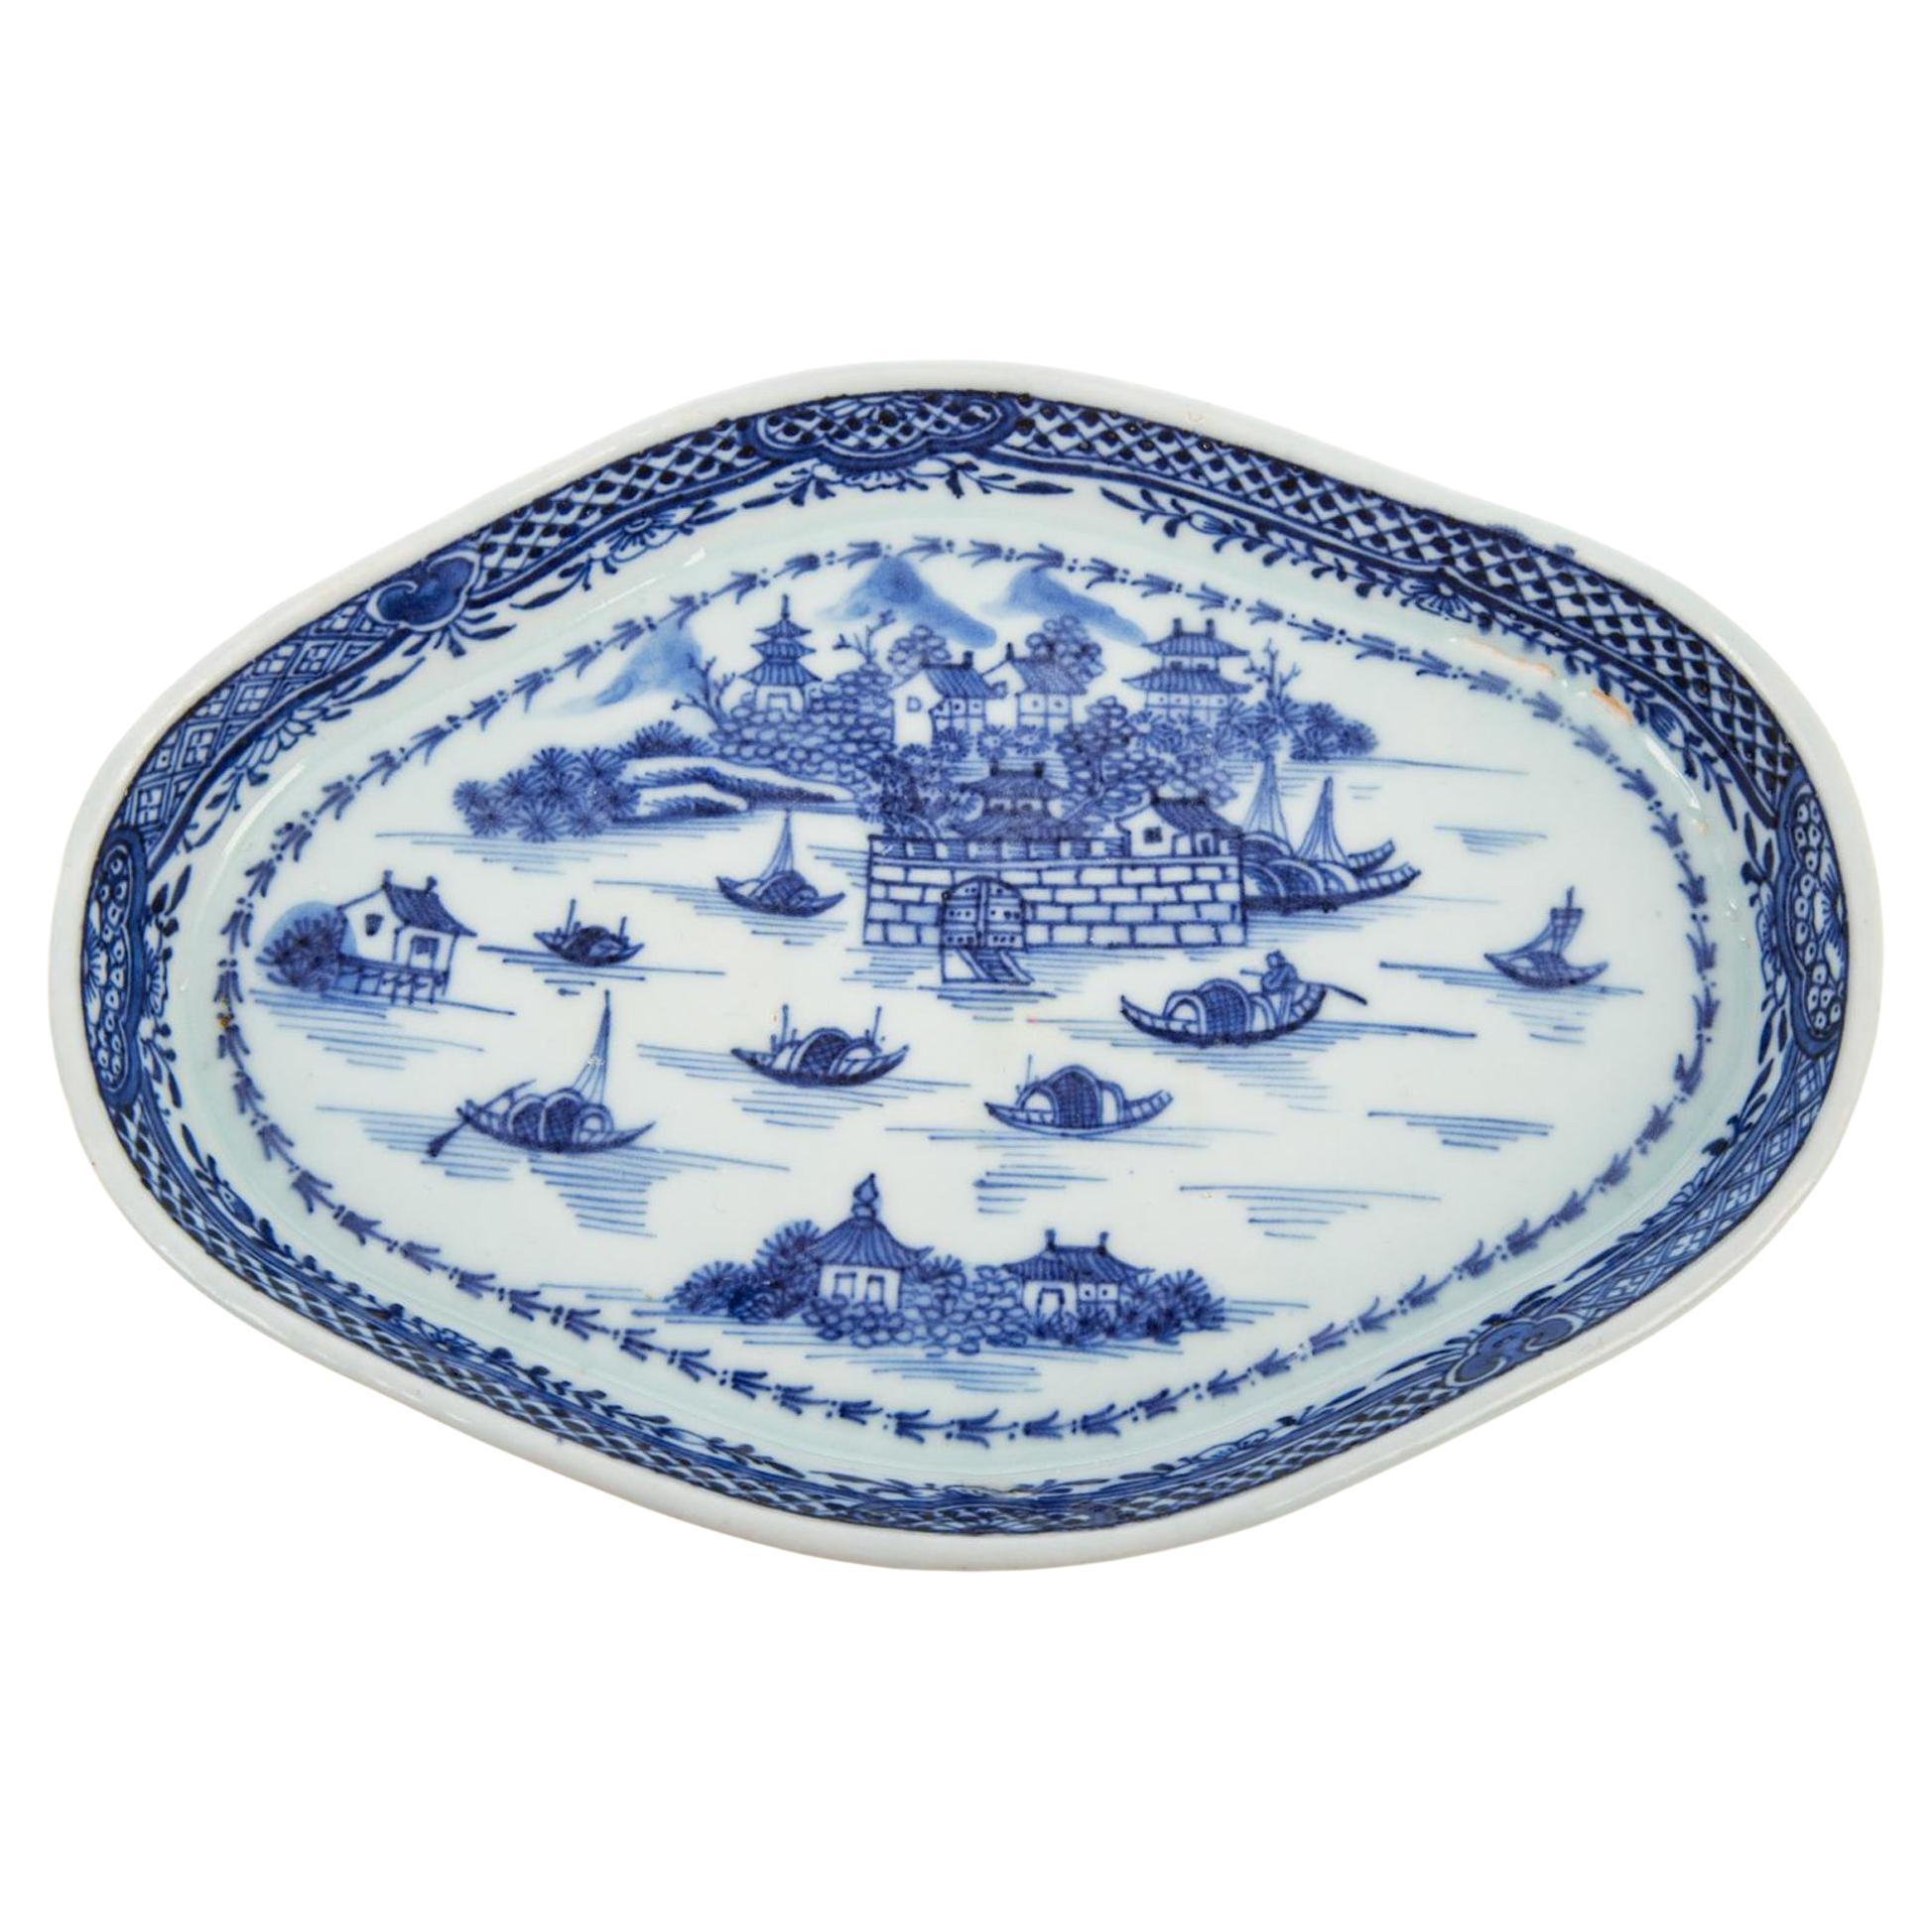 Chinese Export Porcelain Blue & White Spoon Tray with the Dutch Folly Fort